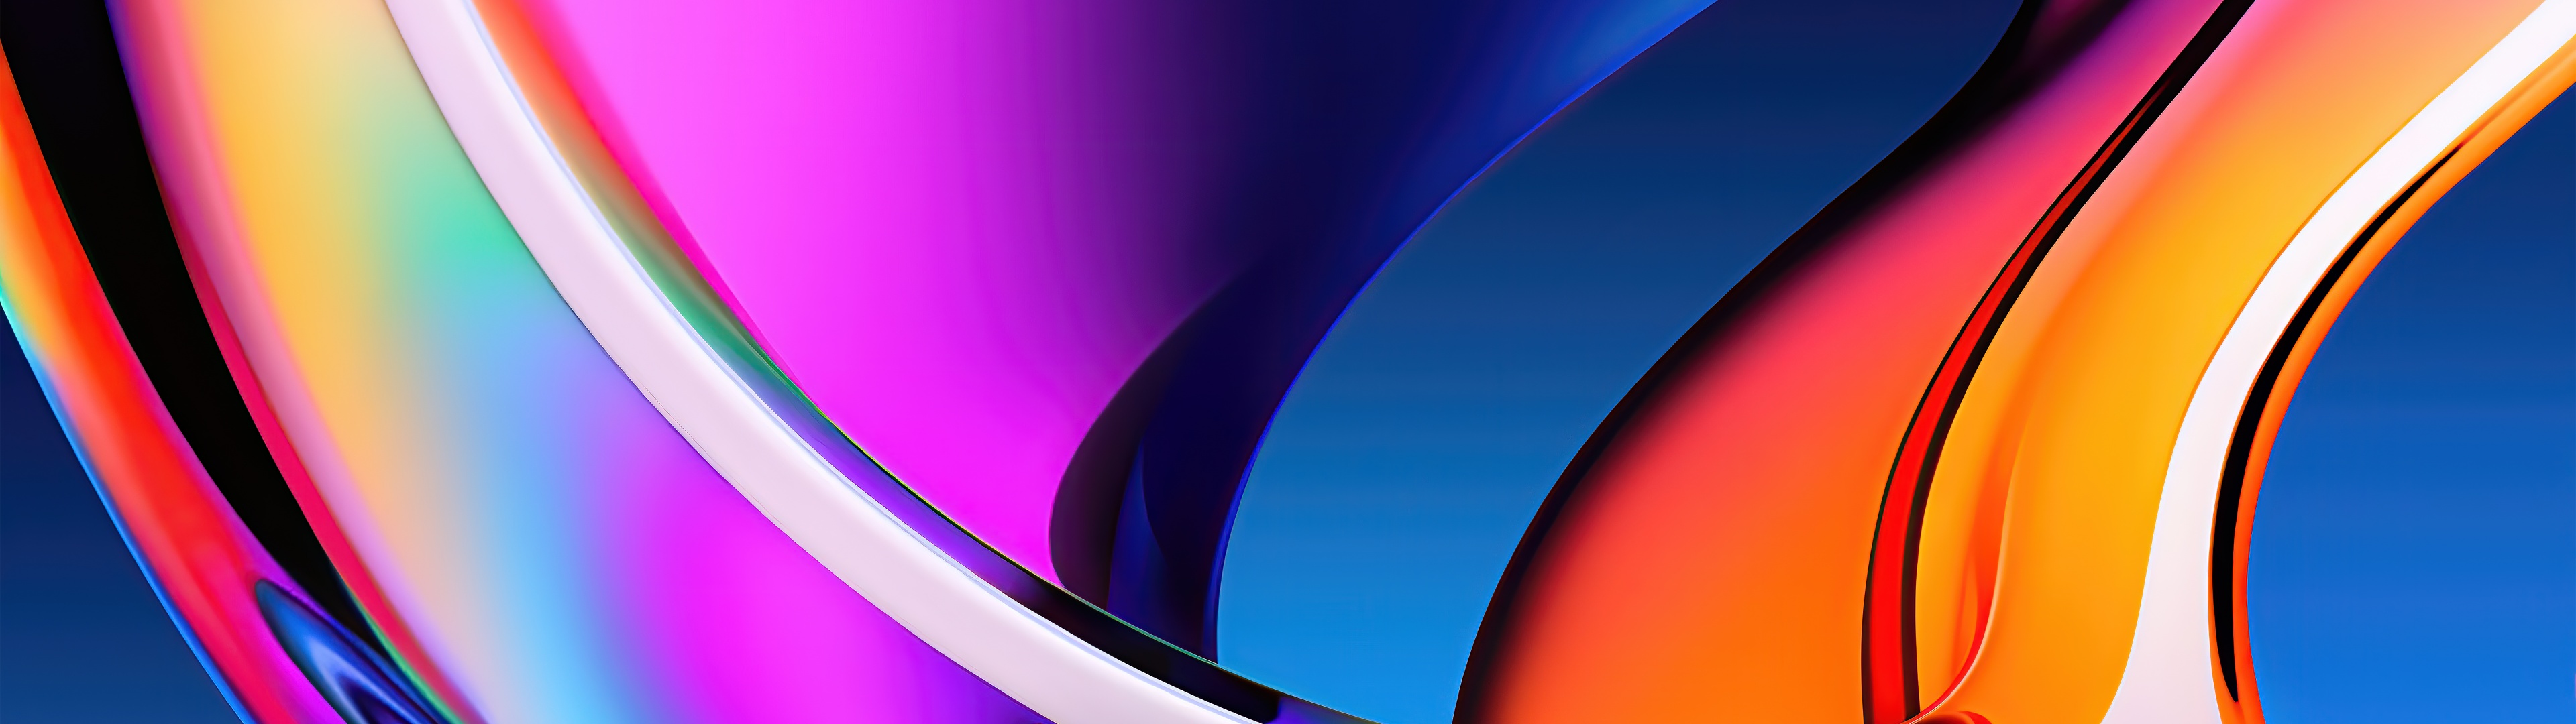 Apple iMac Wallpaper 4K, Colorful, Stock, Abstract, #2278